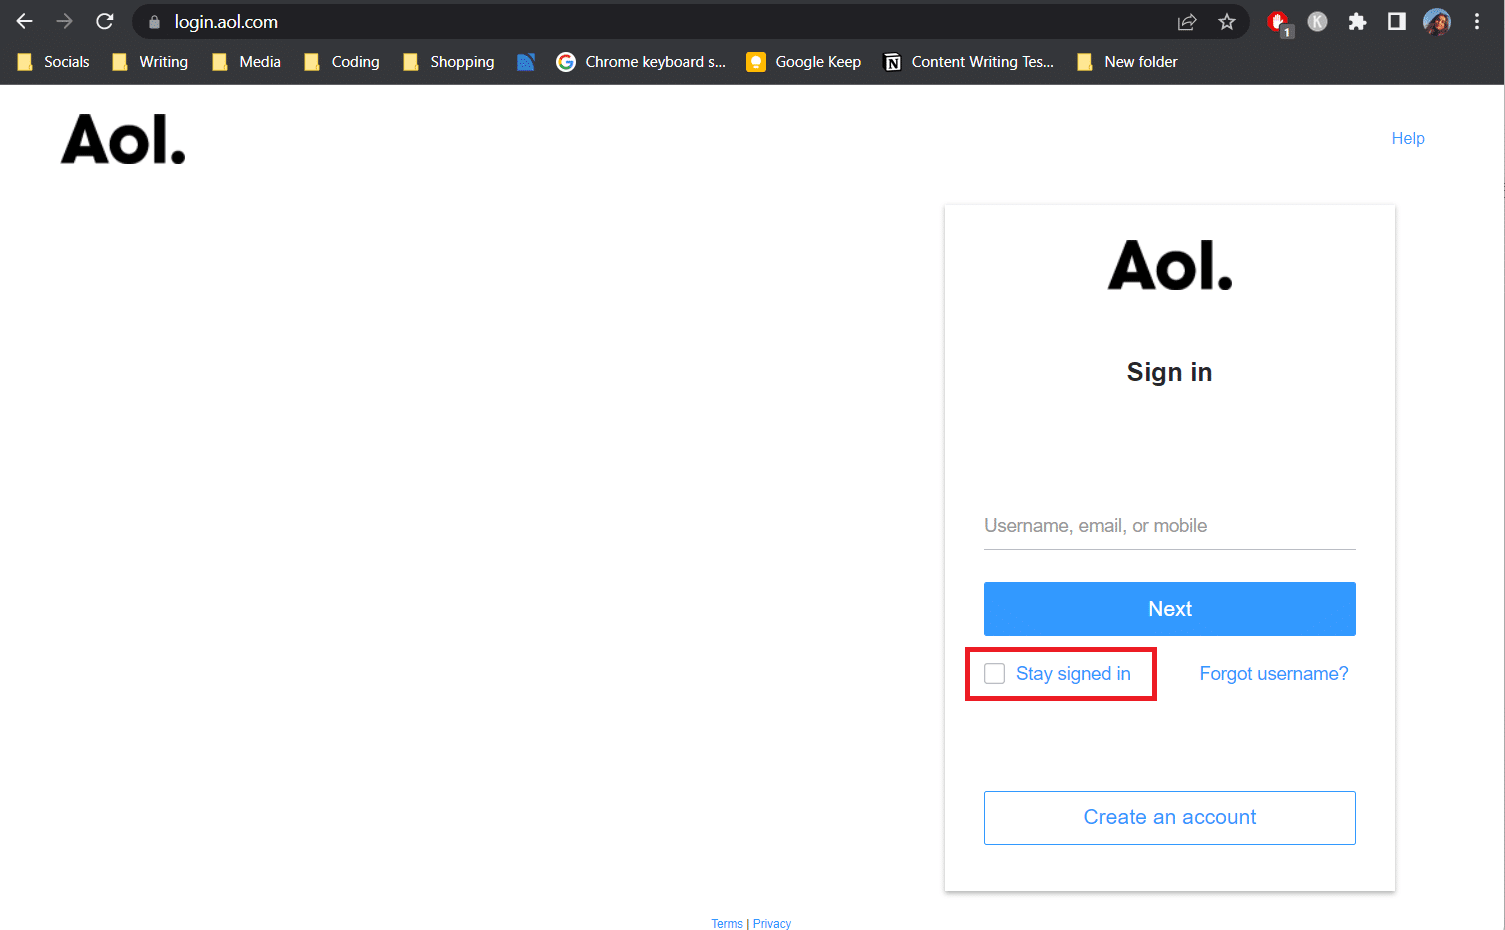 utilise the stay signed in option on a computer you trust when logging into your AOL Mail account